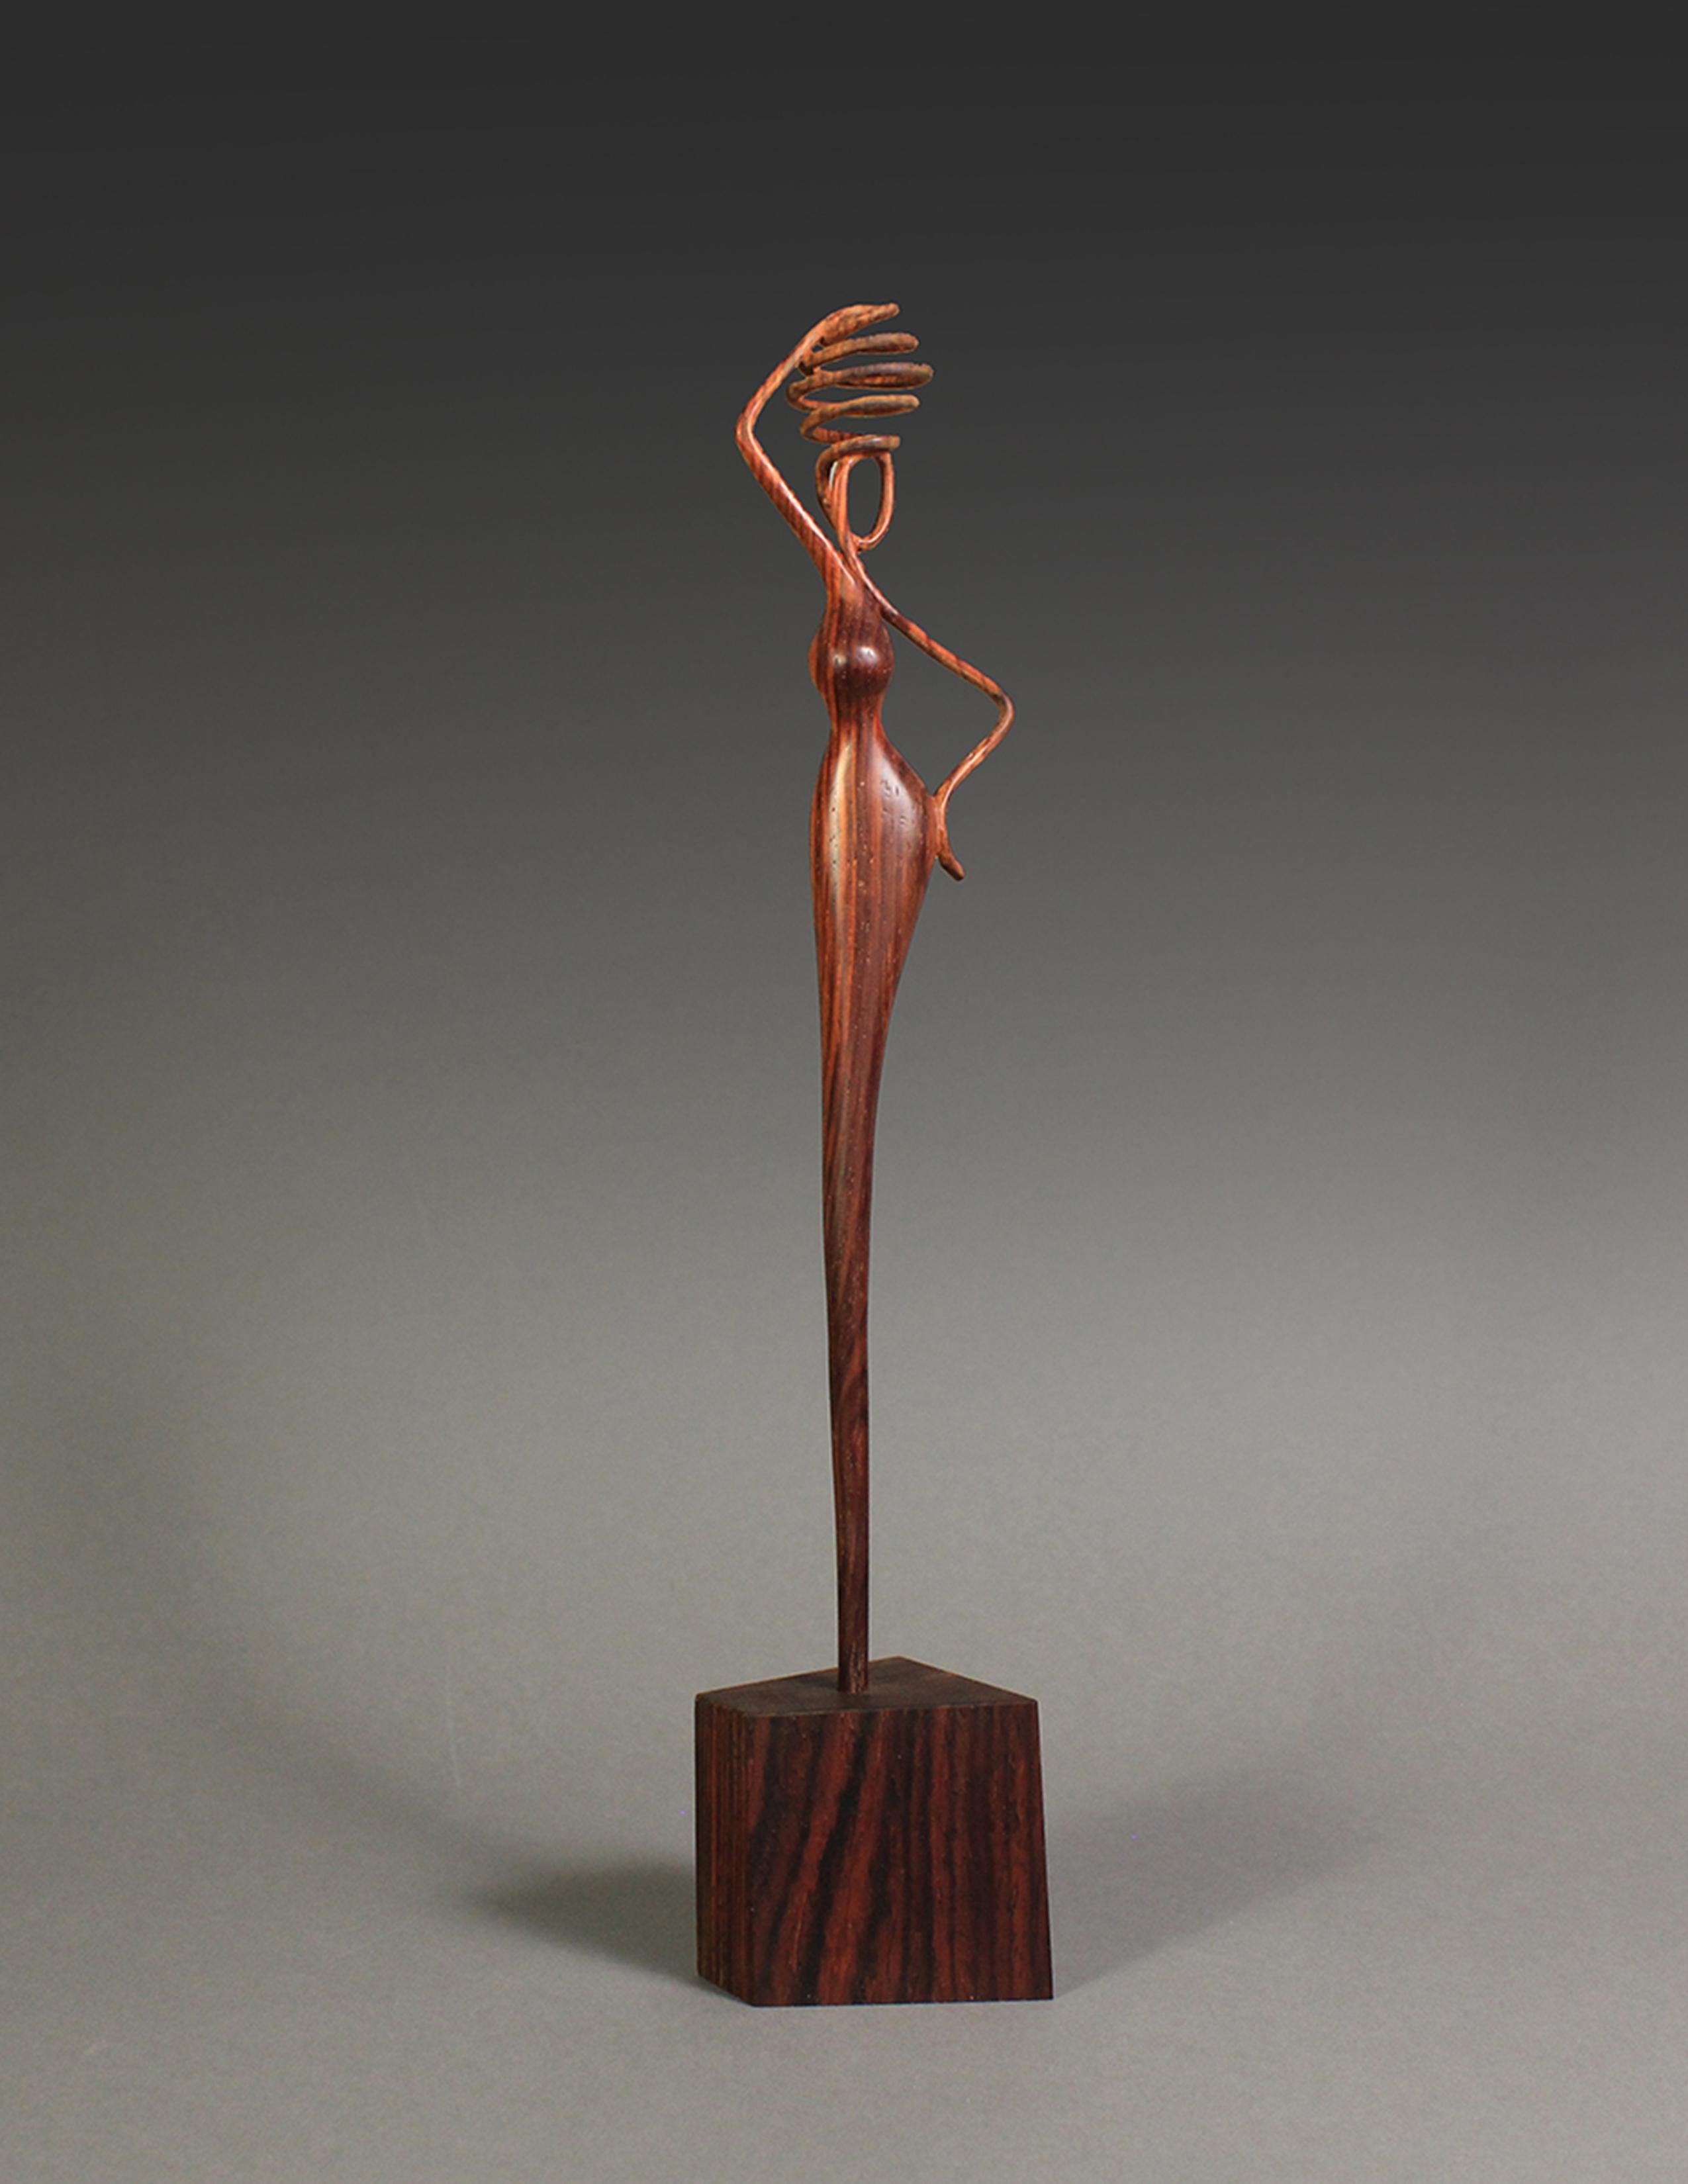 American Girl with a Jar, Cocobolo Wood sculpture by Nairi Safaryan For Sale